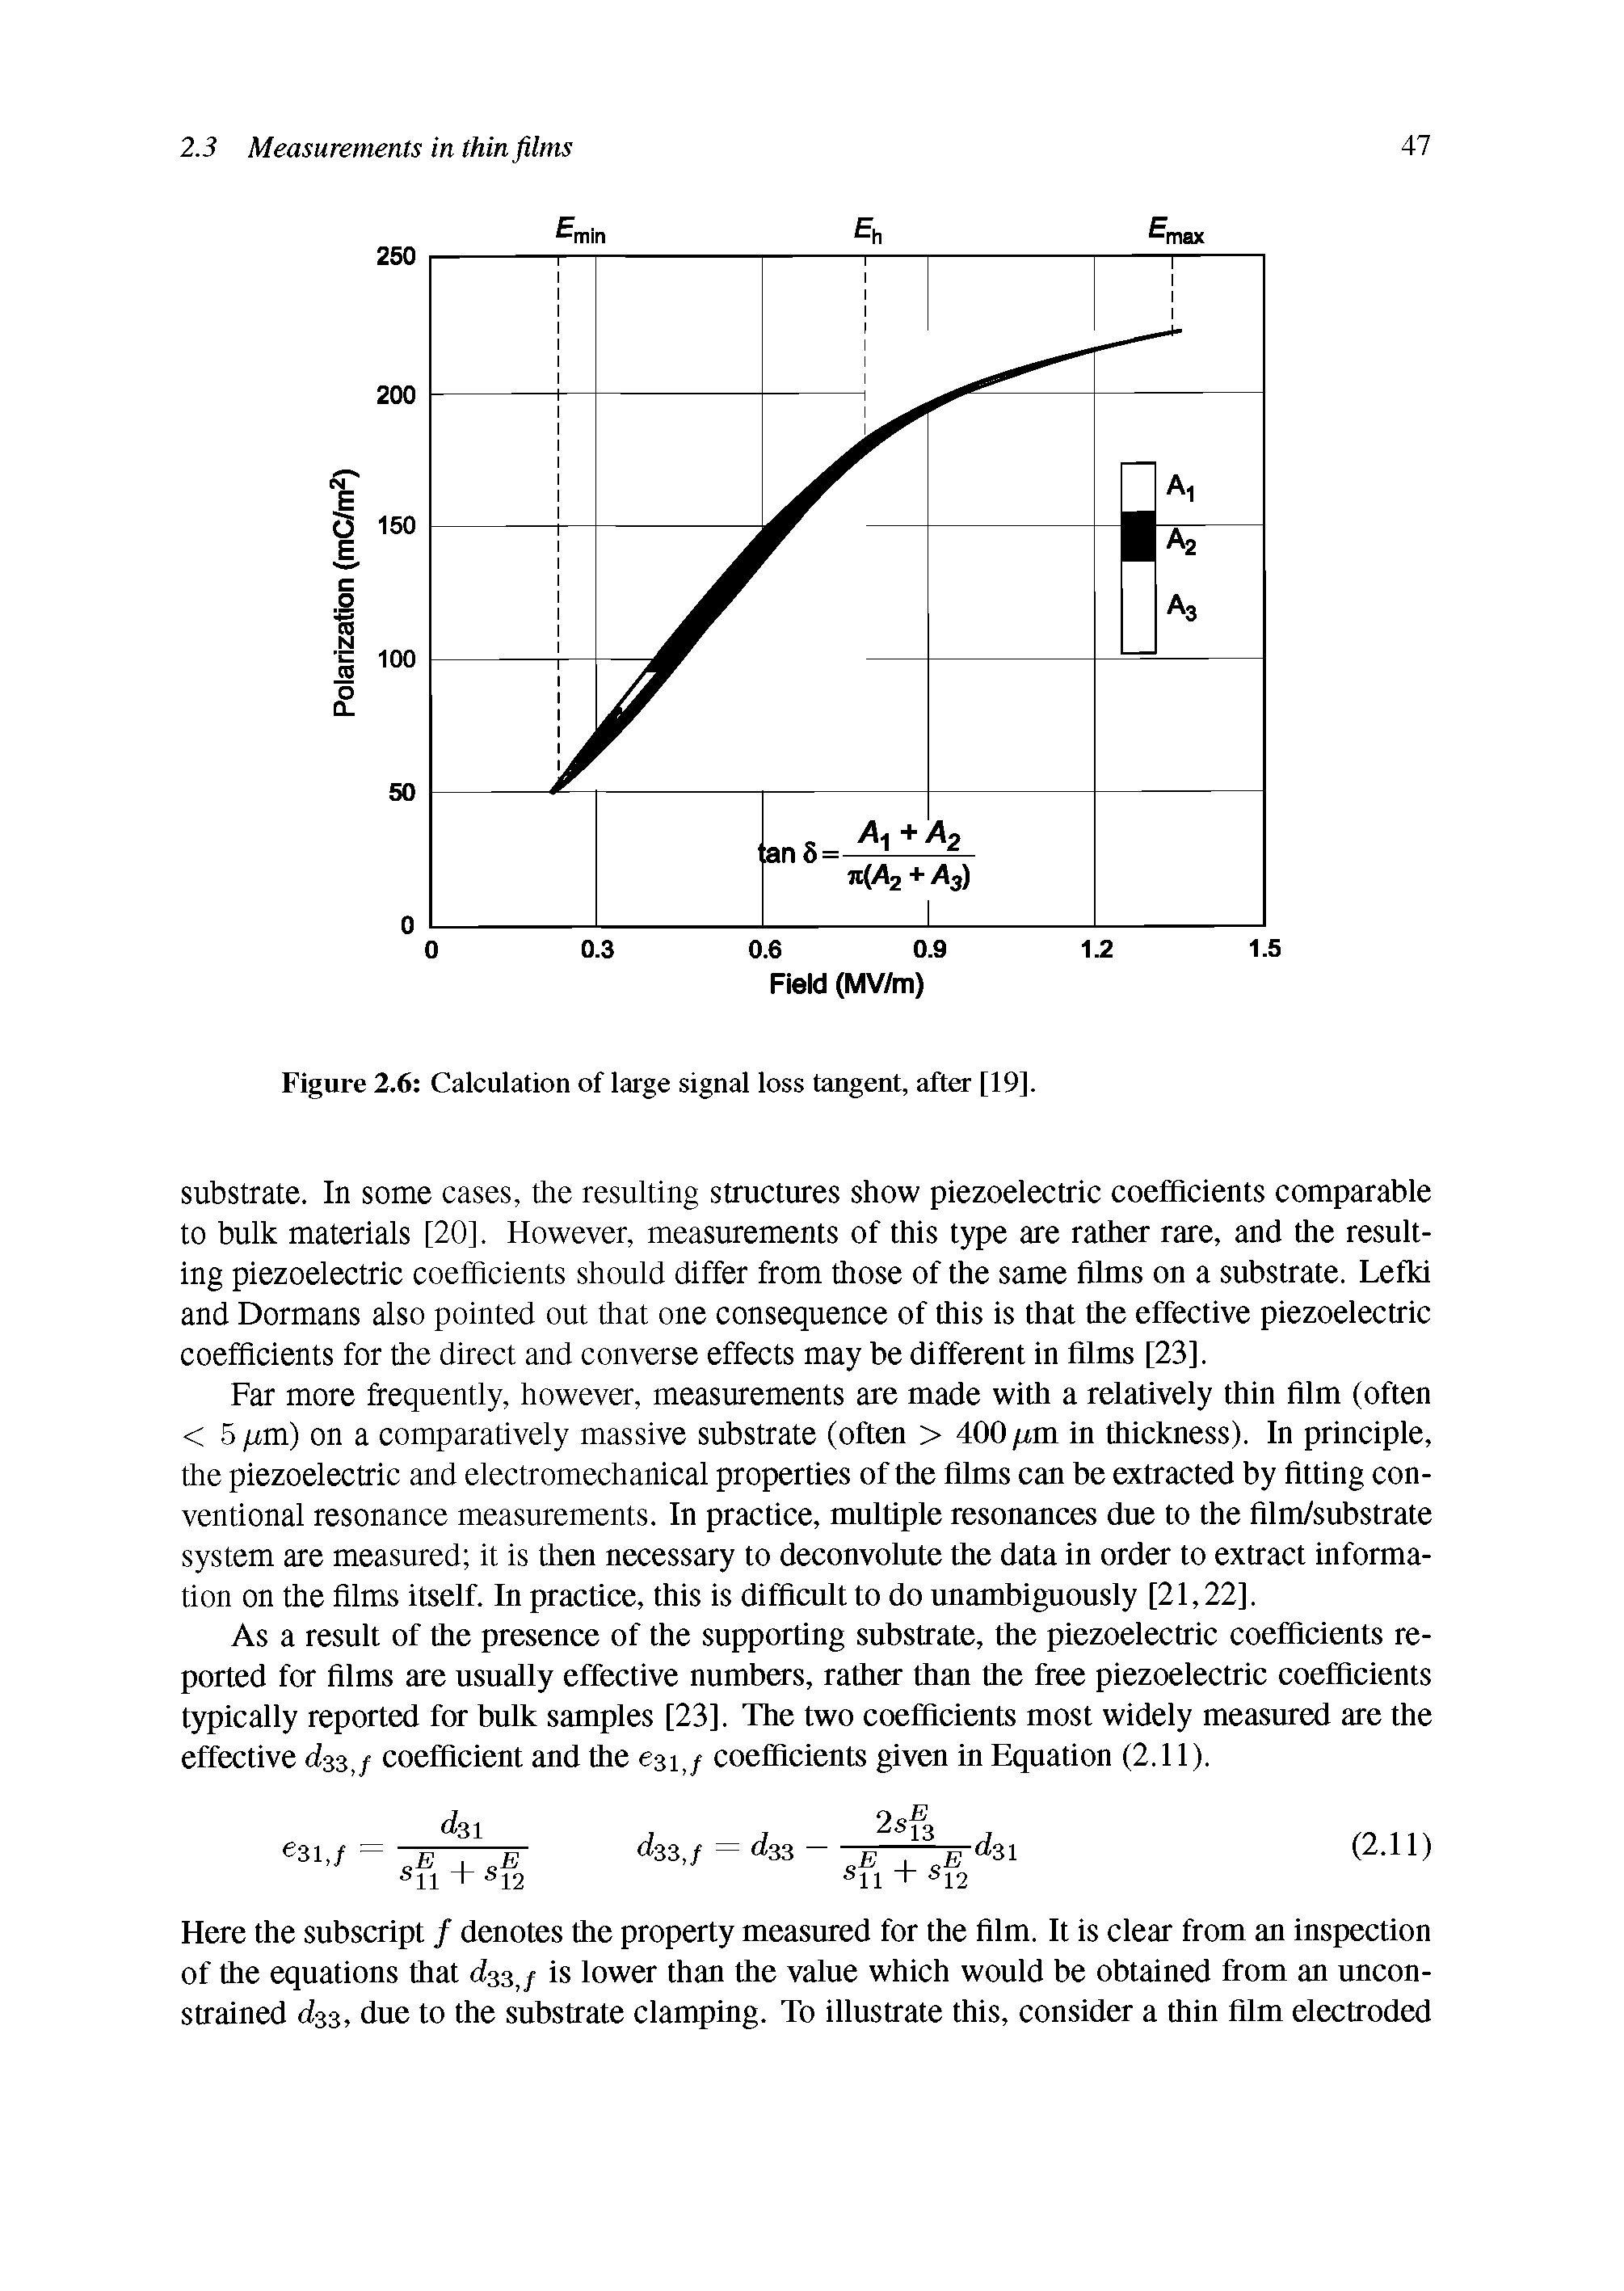 Figure 2.6 Calculation of large signal loss tangent, after [19].